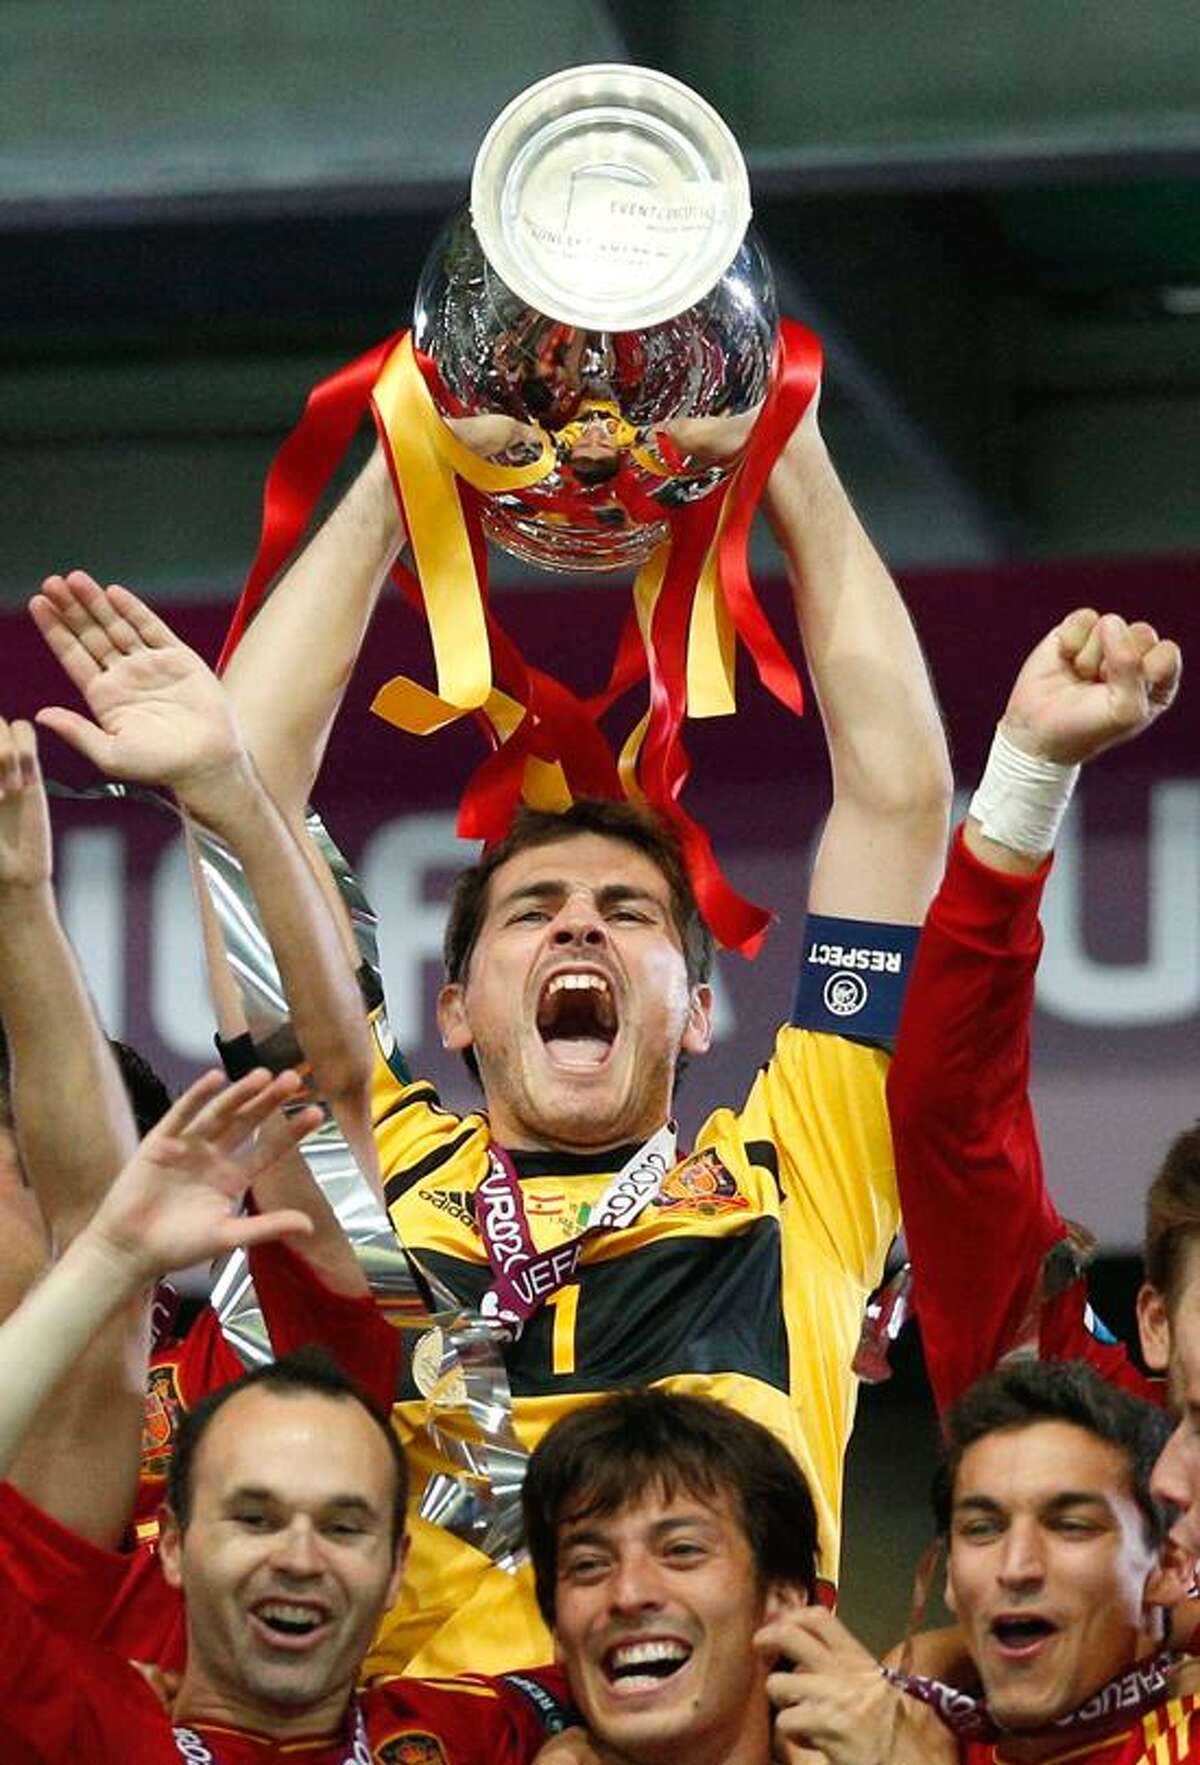 Spain goalkeeper Iker Casillas celebrate s with the trophy after the Euro 2012 soccer championship final between Spain and Italy in Kiev, Ukraine, Sunday, July 1, 2012. (AP Photo/Michael Sohn)